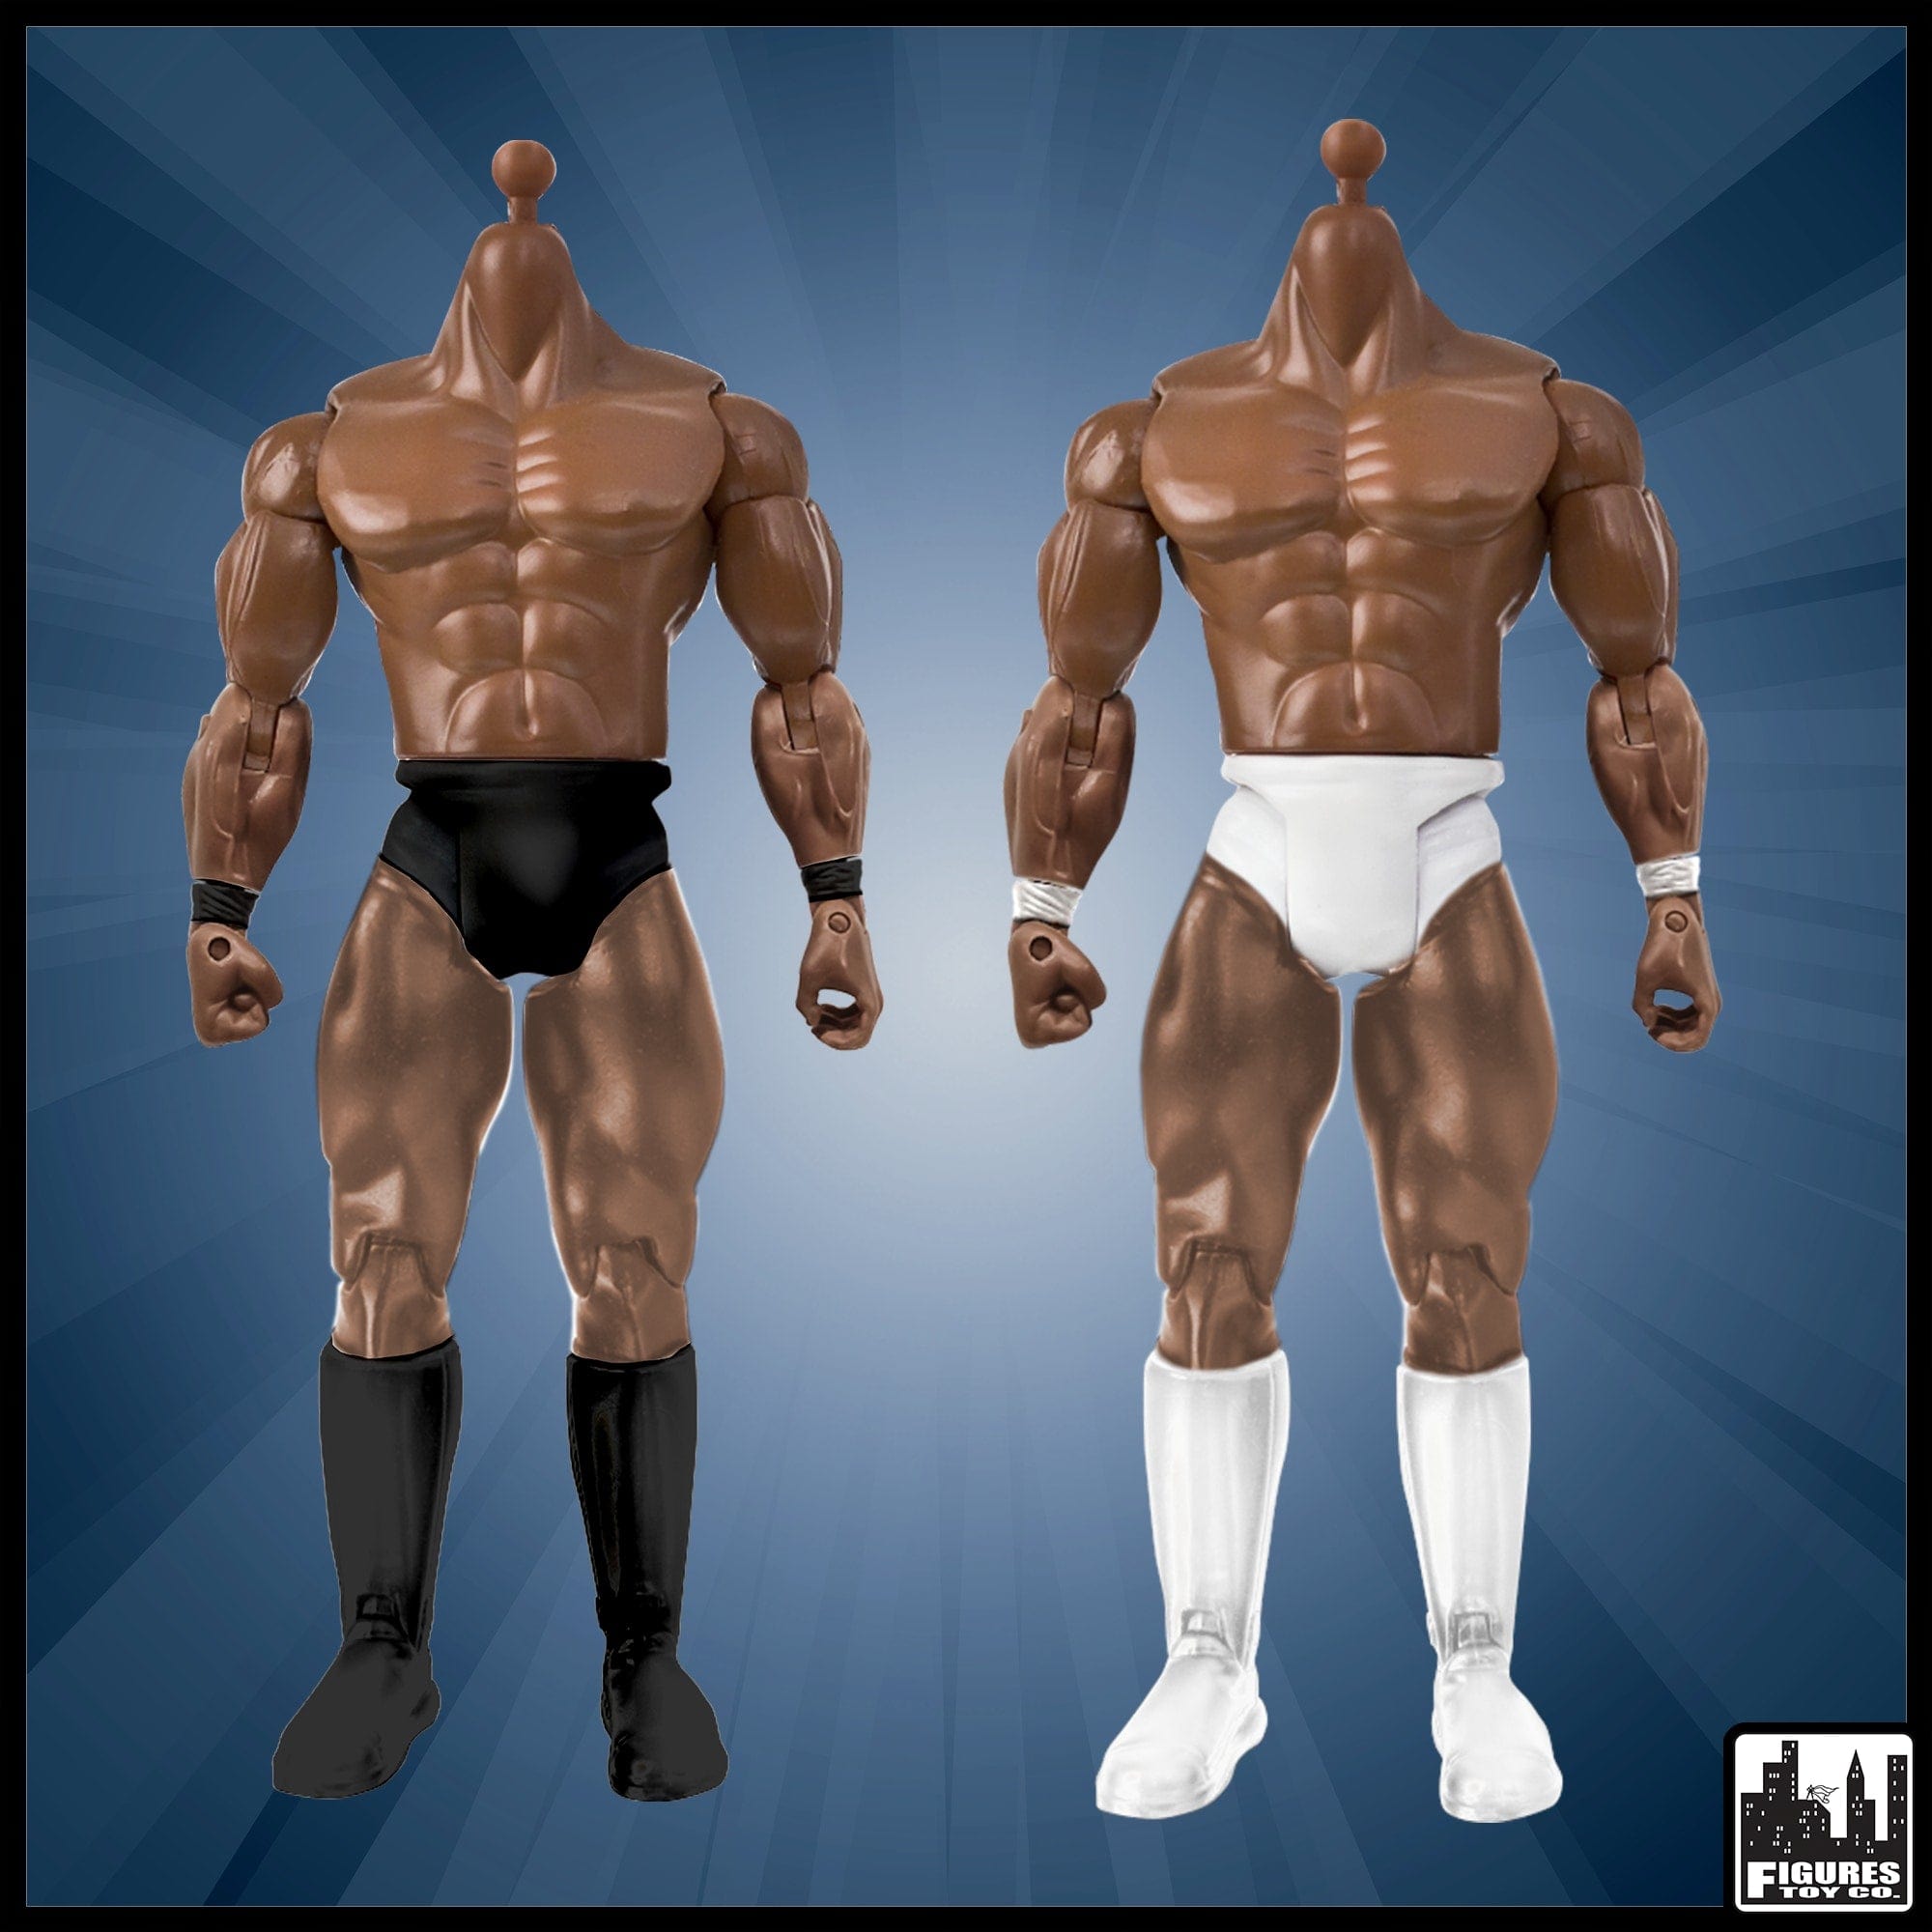 Generic 7 Inch Wrestling Action Figure With African American Body & Trunks